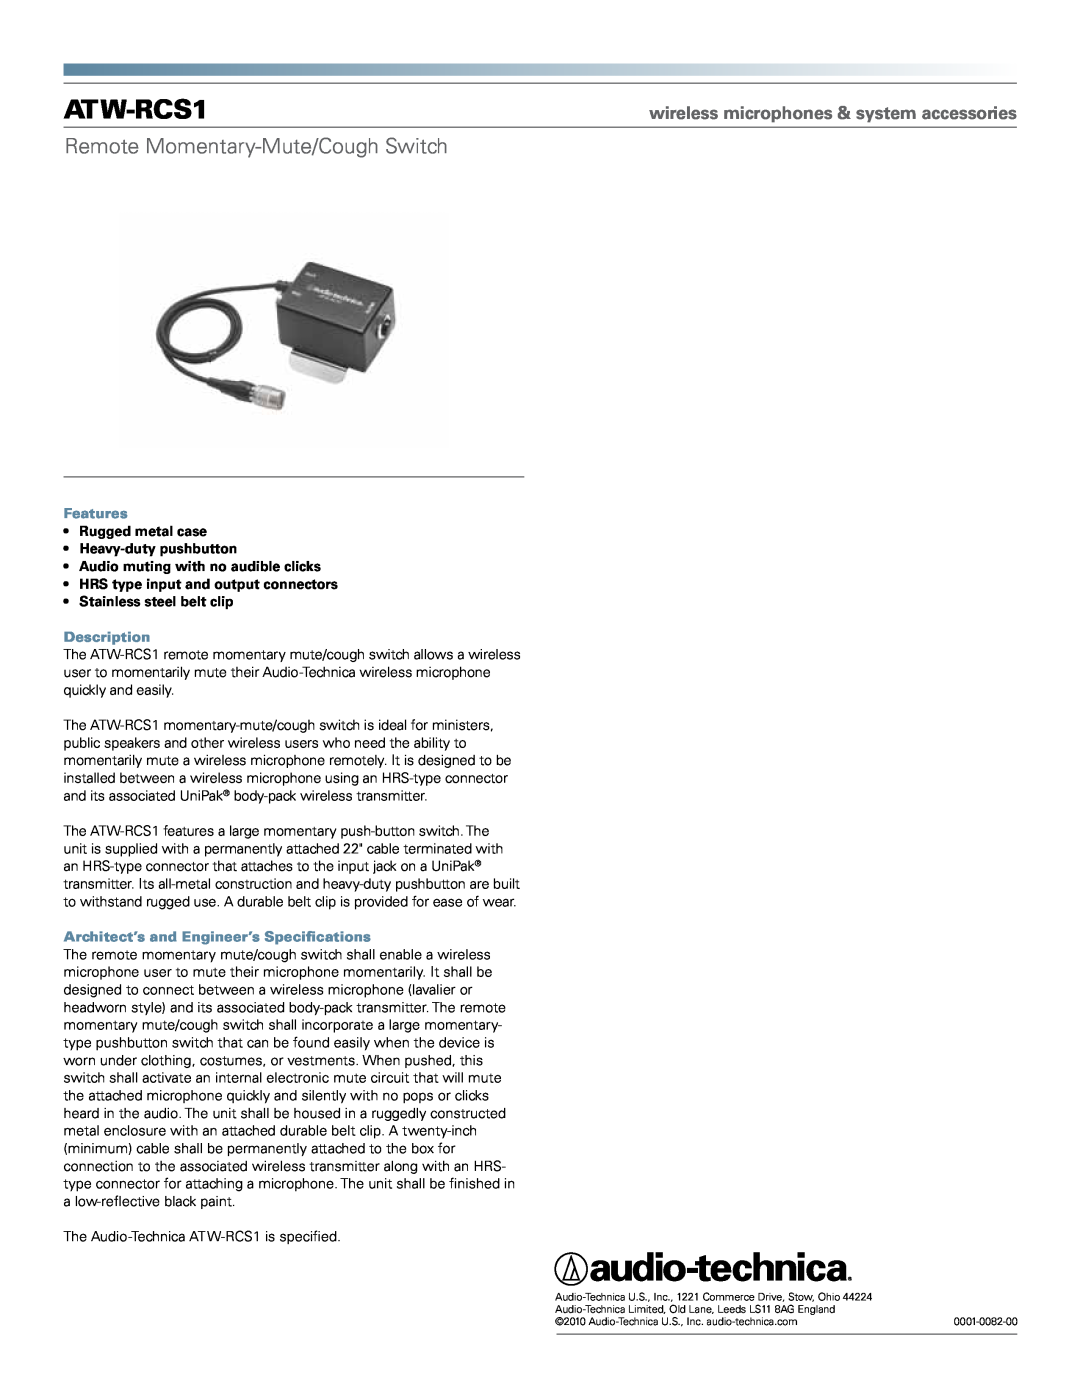 Audio-Technica ATW-RCS1 manual Remote Momentary-Mute/Cough Switch, wireless microphones & system accessories, Features 